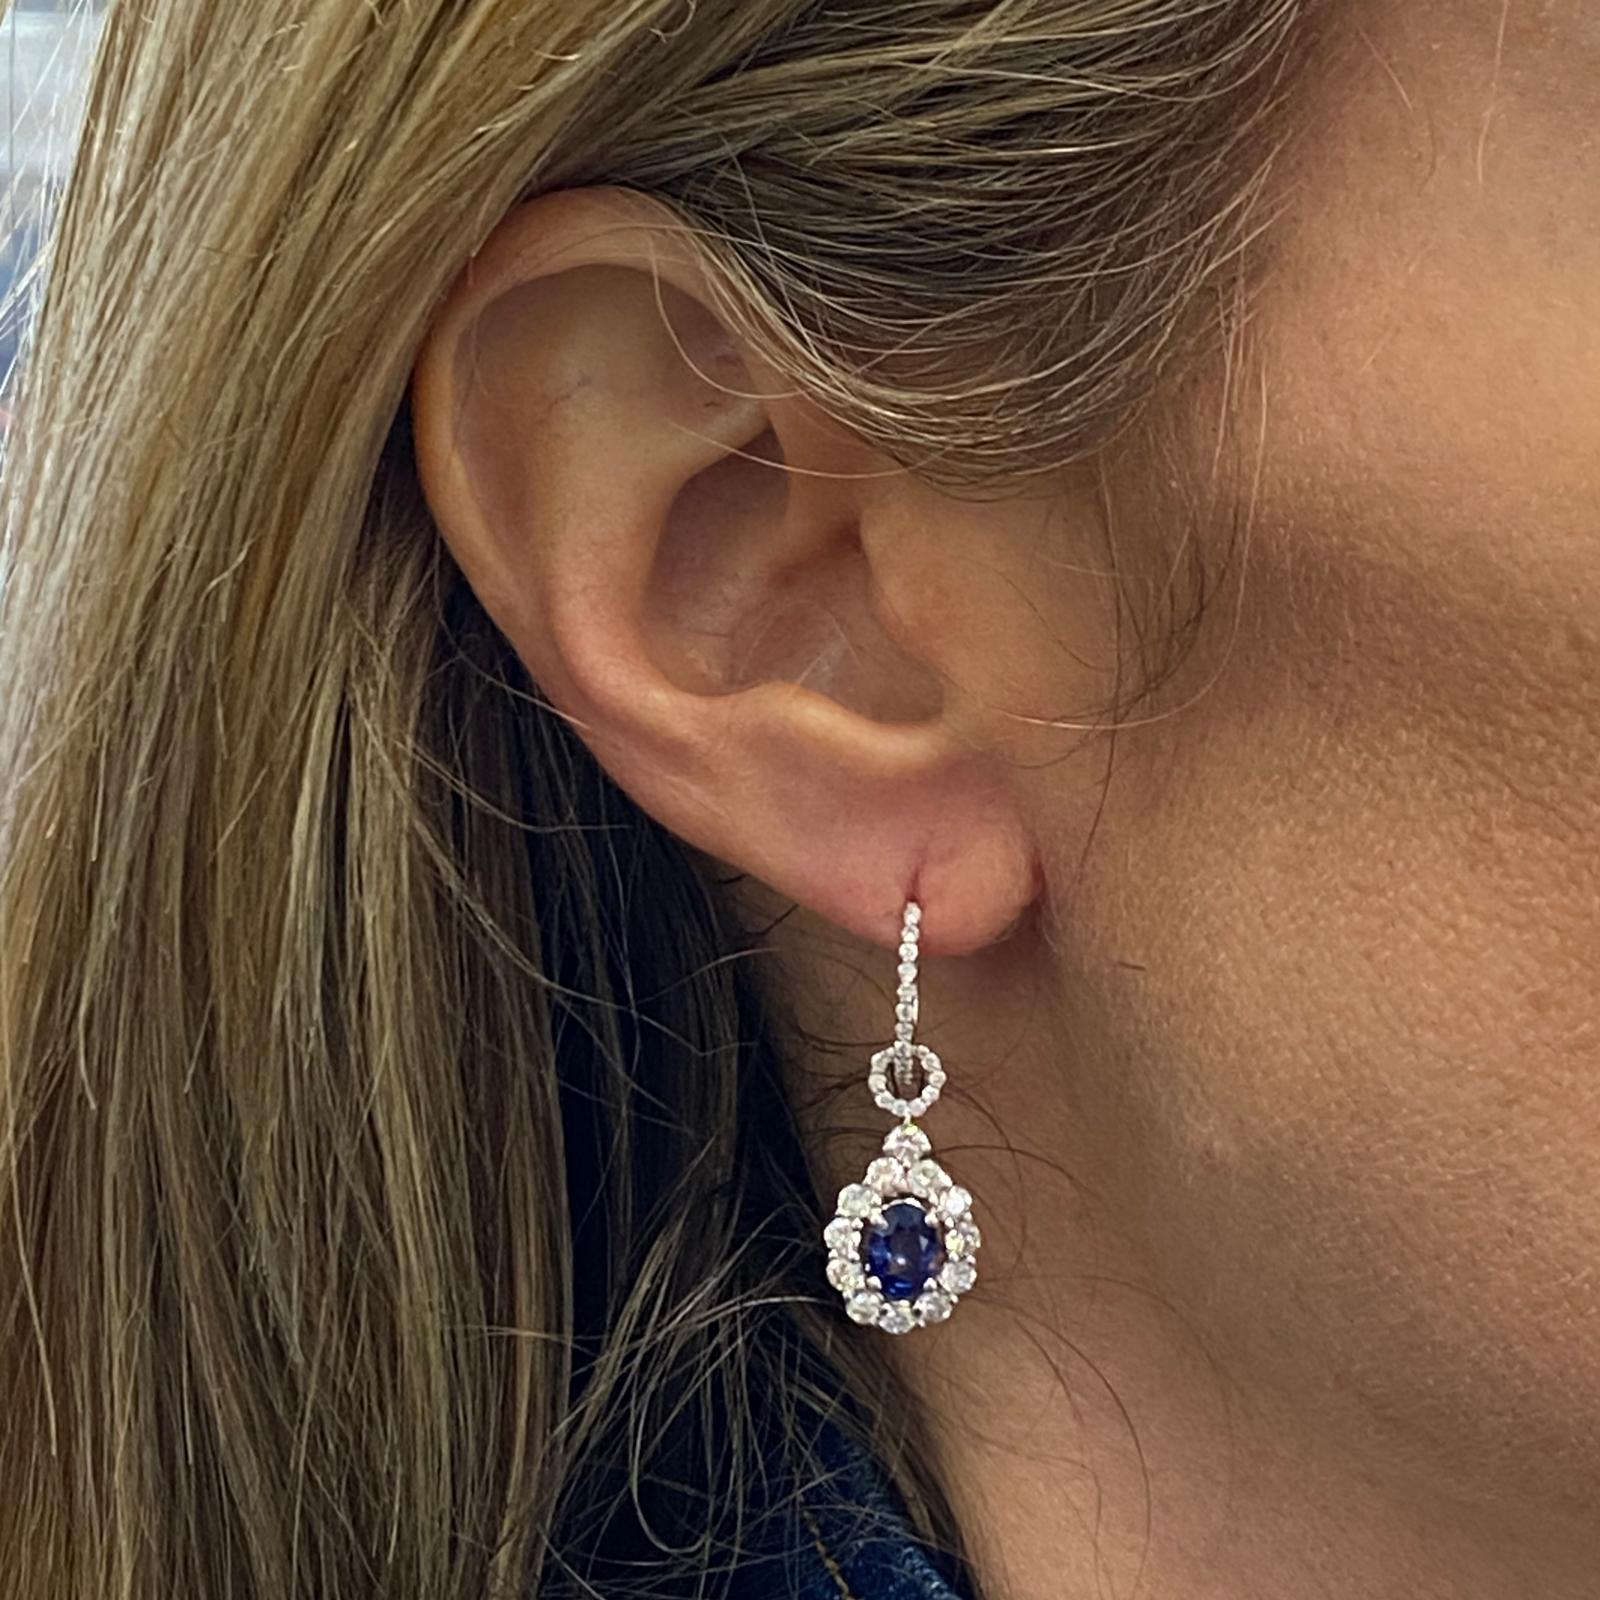 Blue sapphire diamond drop earrings fashioned in 18 karat white gold. The two matching round natural blue sapphires weigh 2.60 carats. The sapphires are surrounded by 72 round brilliant cut diamonds weighing 1.42 carat total weight and graded G-I